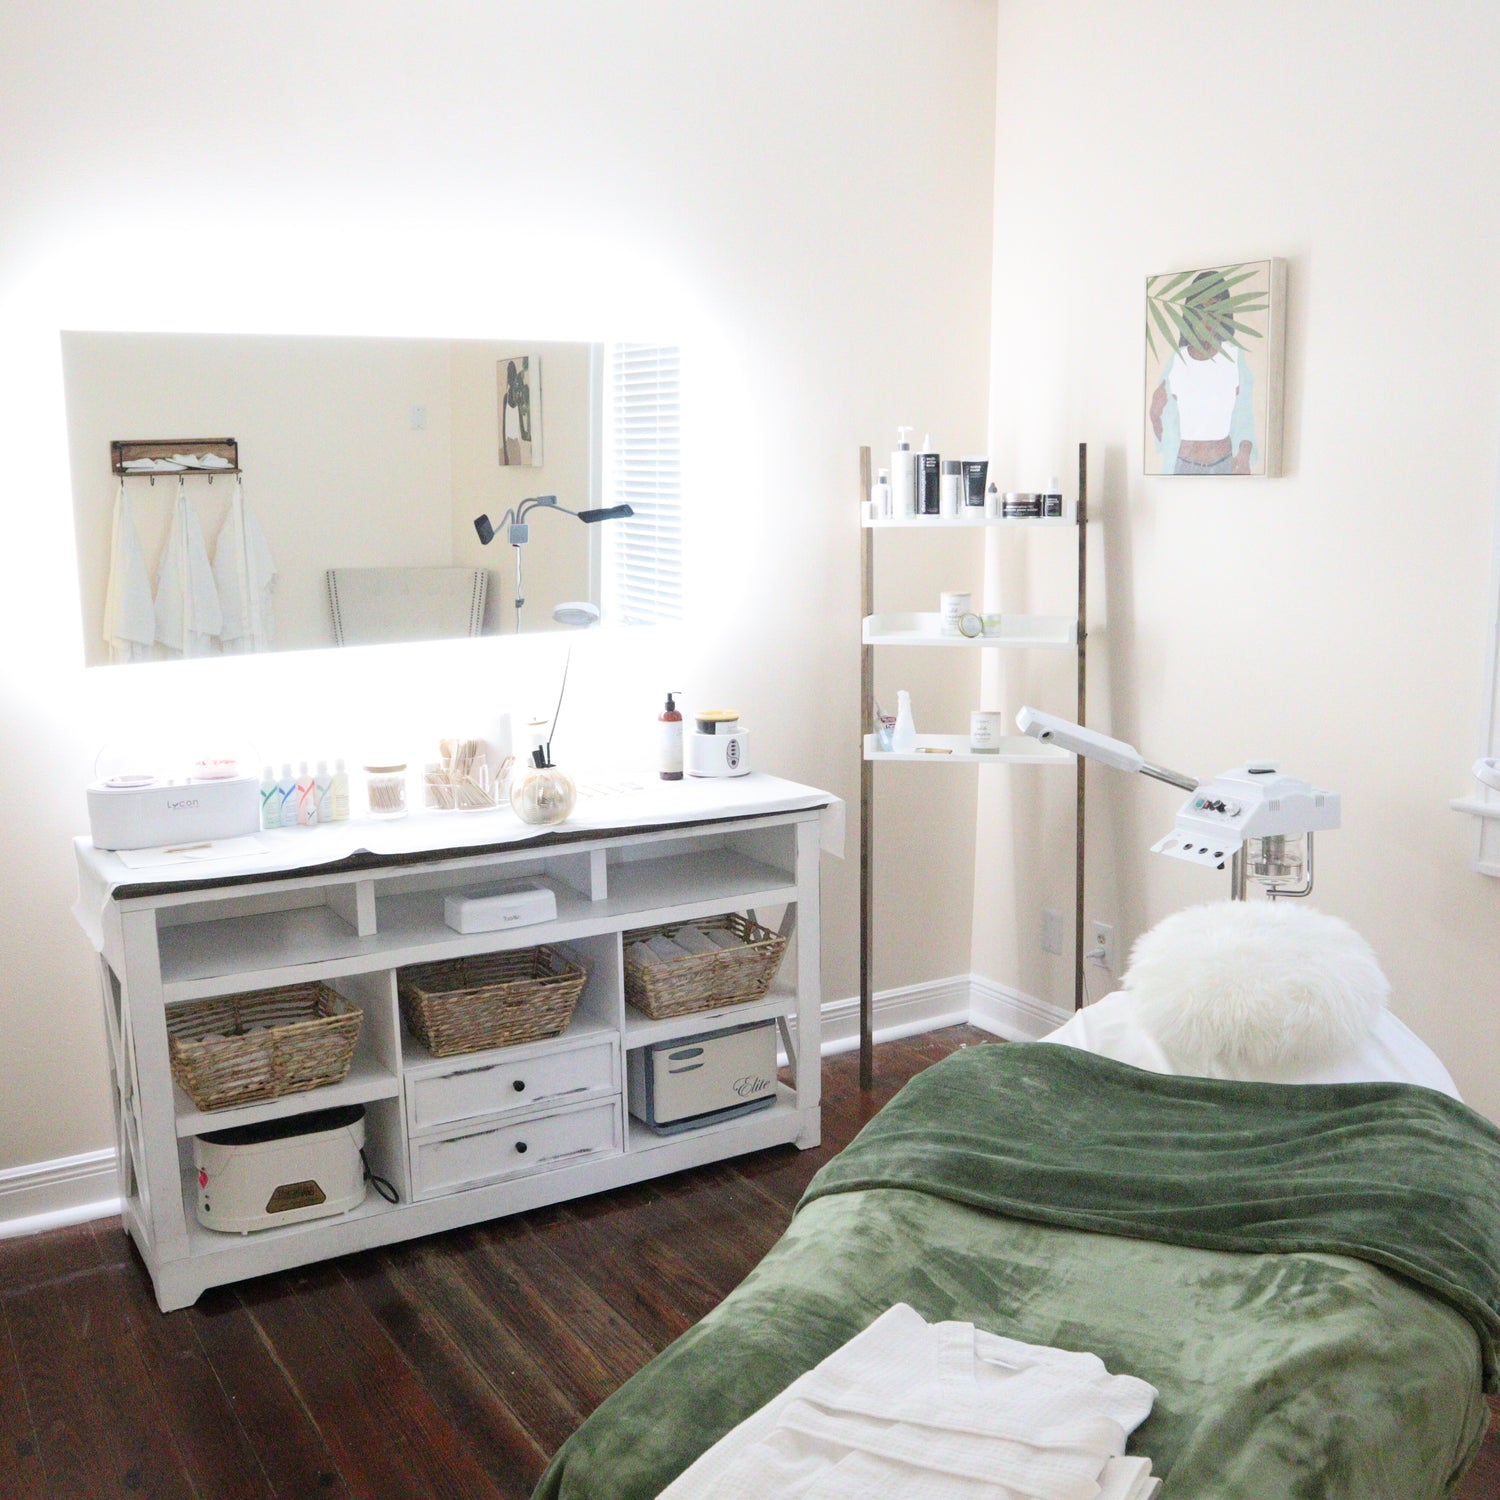 Botanical Nai and Skin Studio Massages in New Orleans